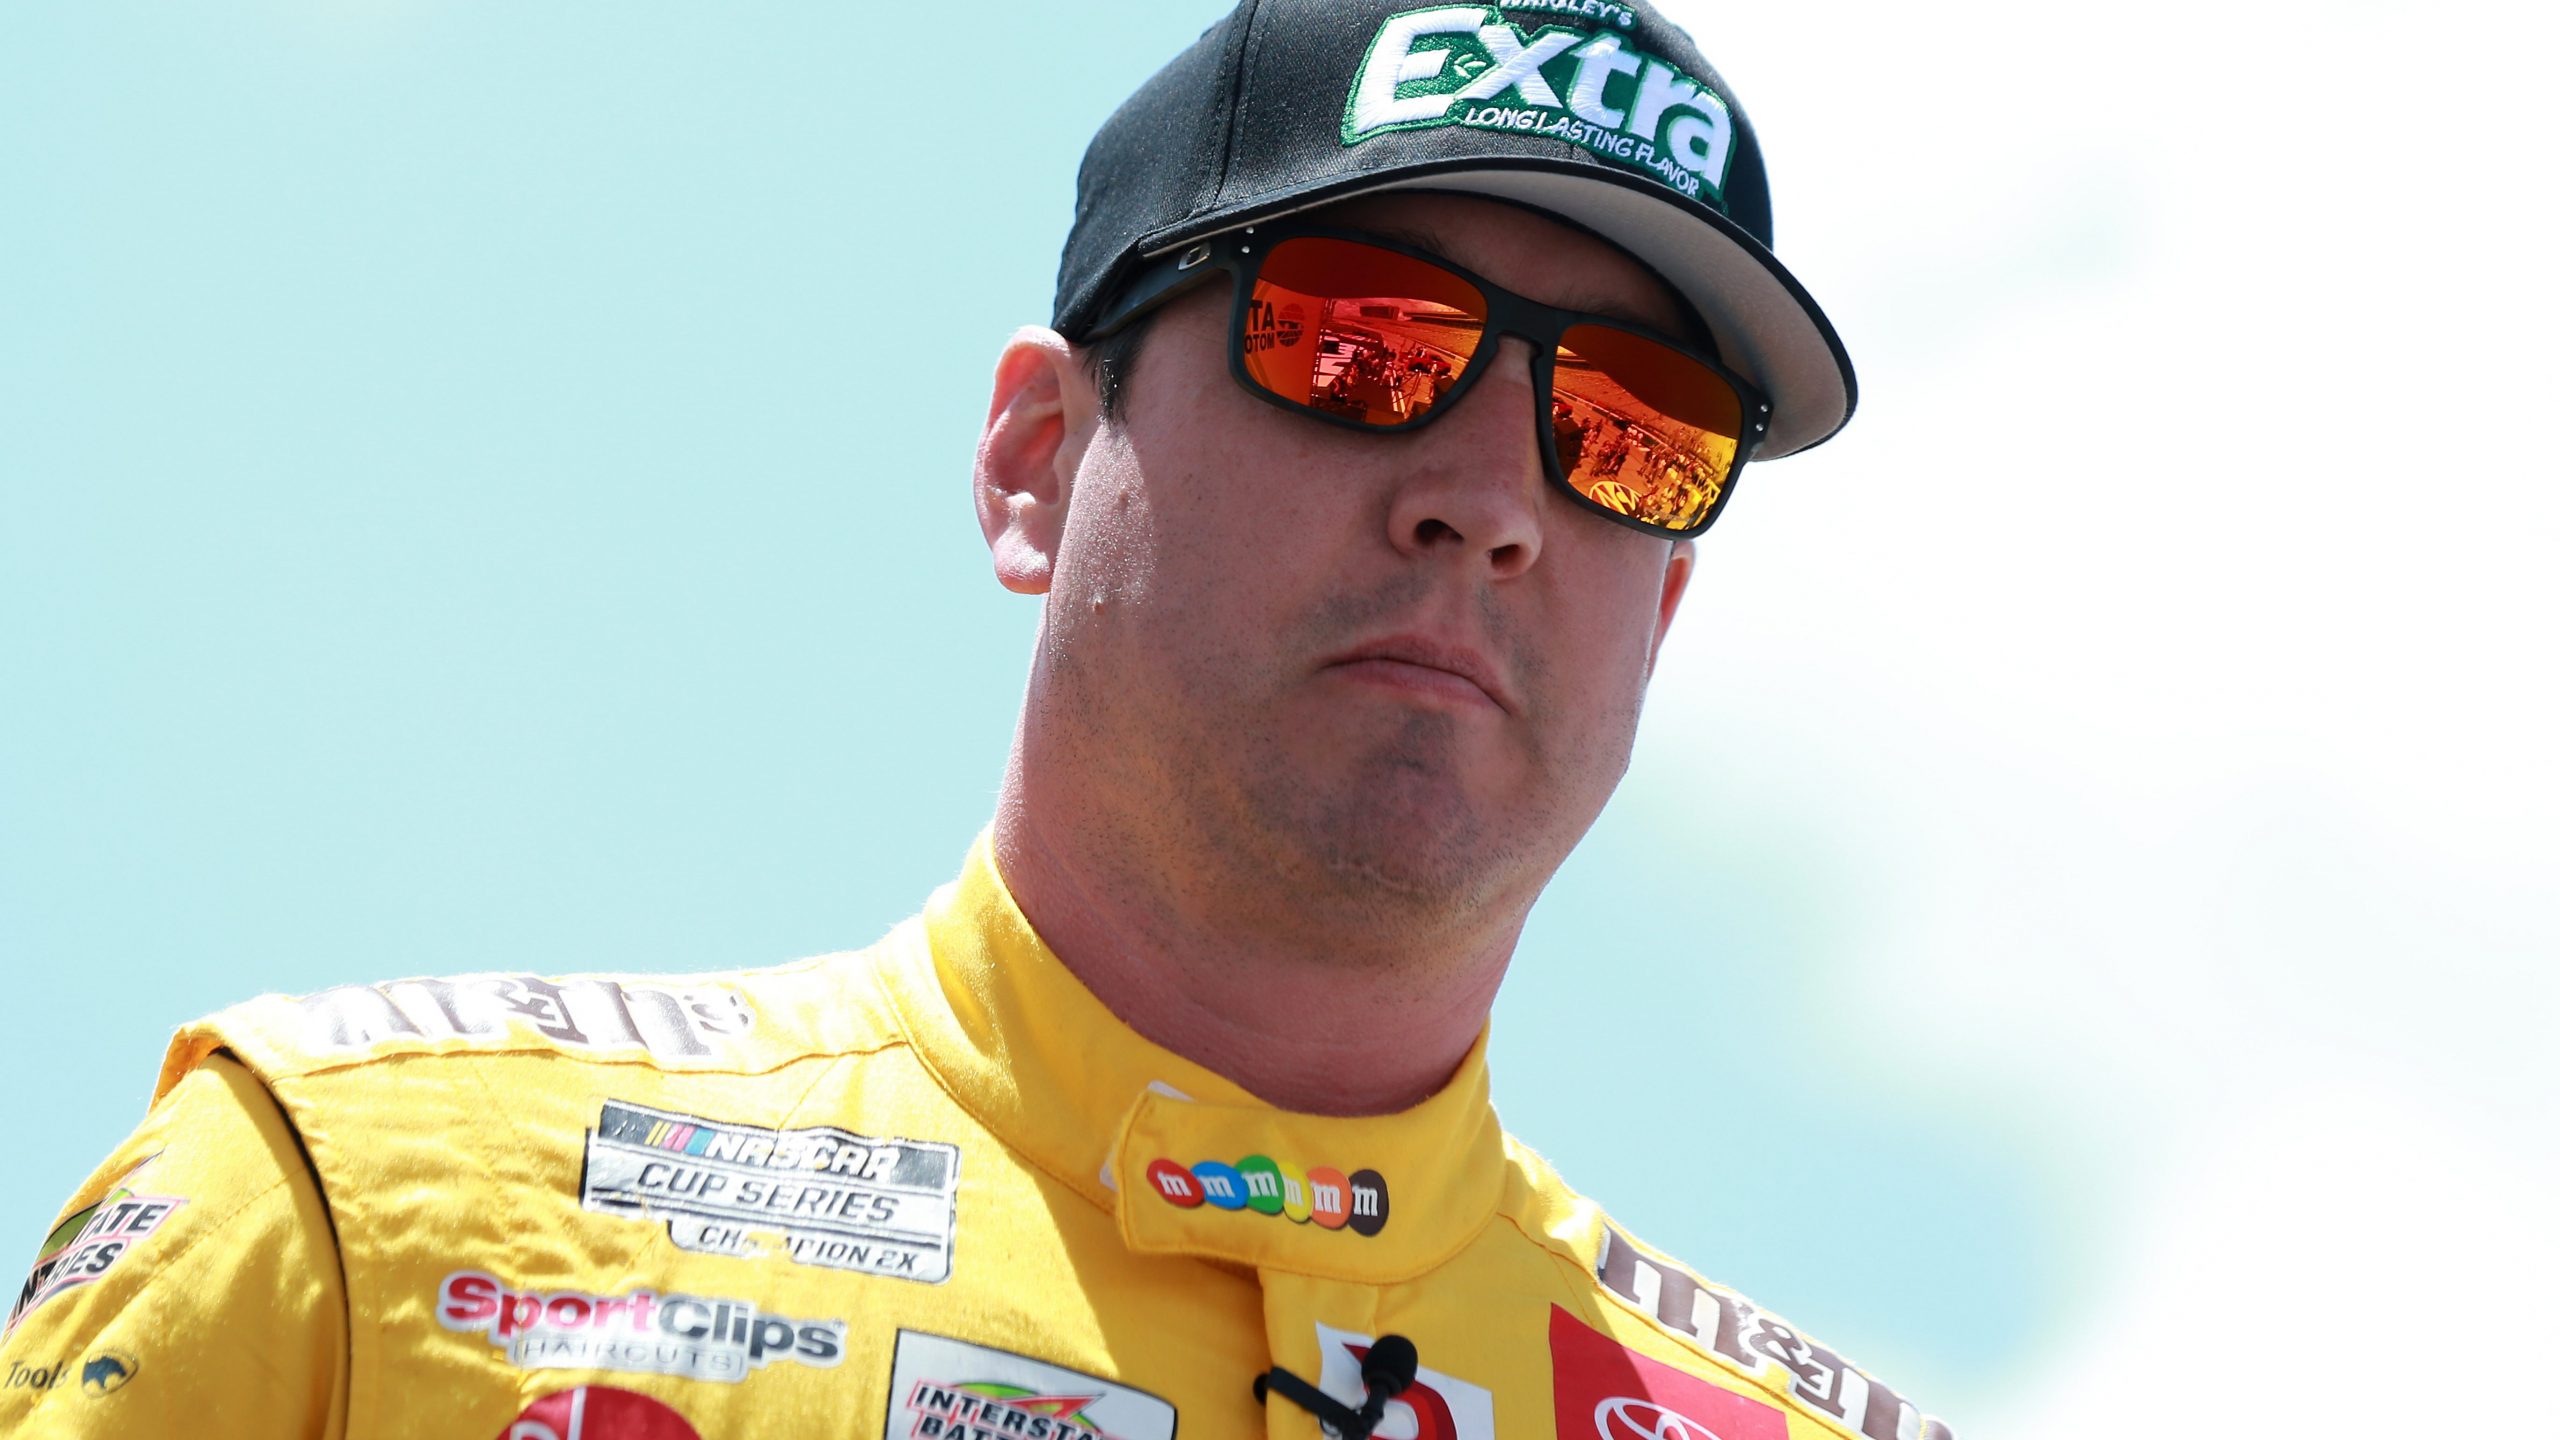 An angry Kyle Busch blasts Atlanta track makeover: ‘There ain’t nobody thinking’